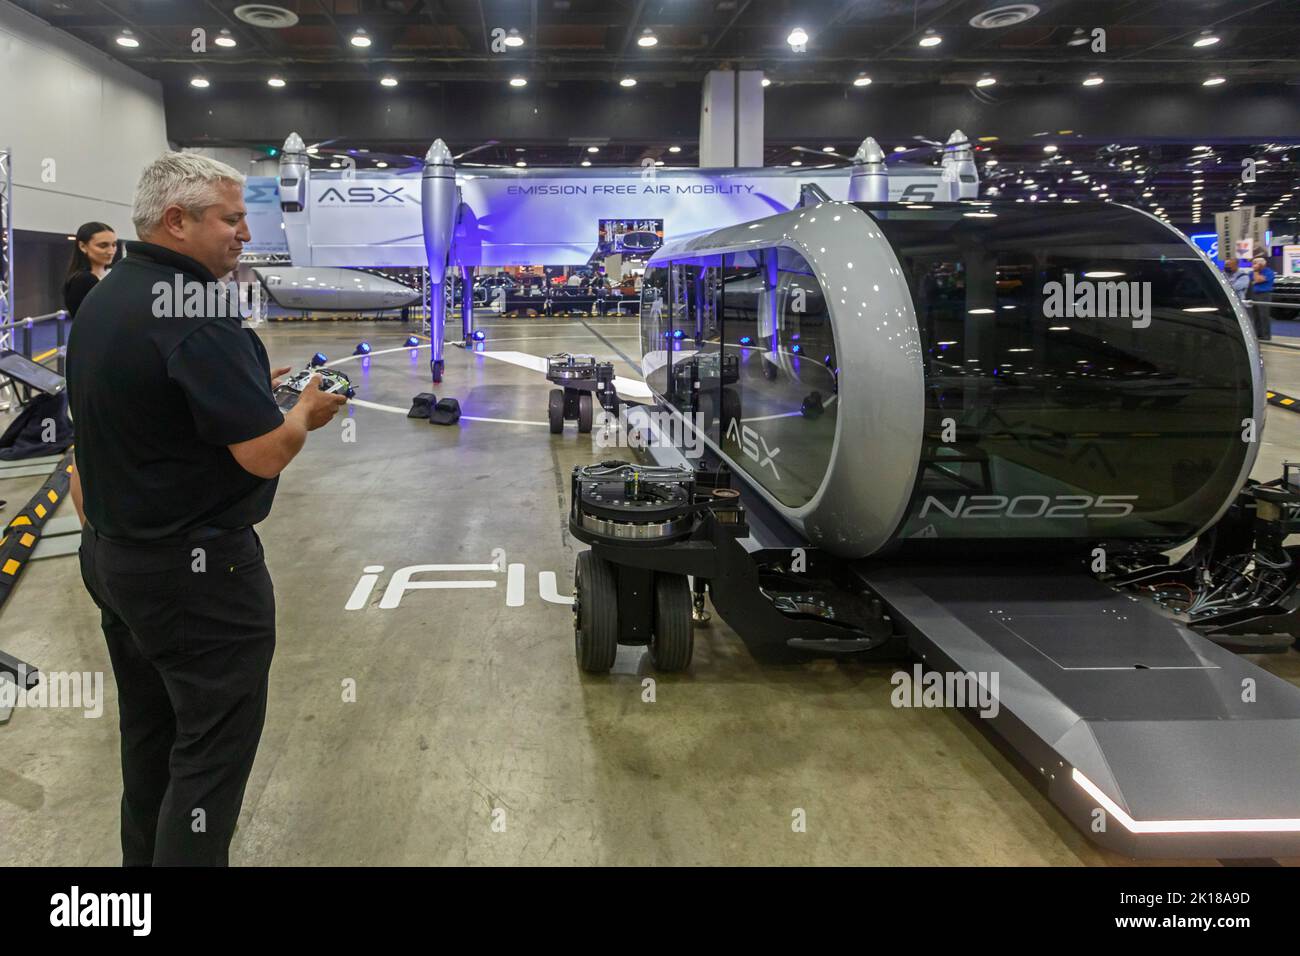 Detroit, Michigan, USA. 15th Sep, 2022. Airspace Experience Technologies displayed an electric vertical take off and landing aircraft at the North American International Auto Show. A worker guides a cargo modulr towards the aircraft. Cargo containers can be switched in a few minutes or replaced with a module carrying passengers. Credit: Jim West/Alamy Live News Stock Photo